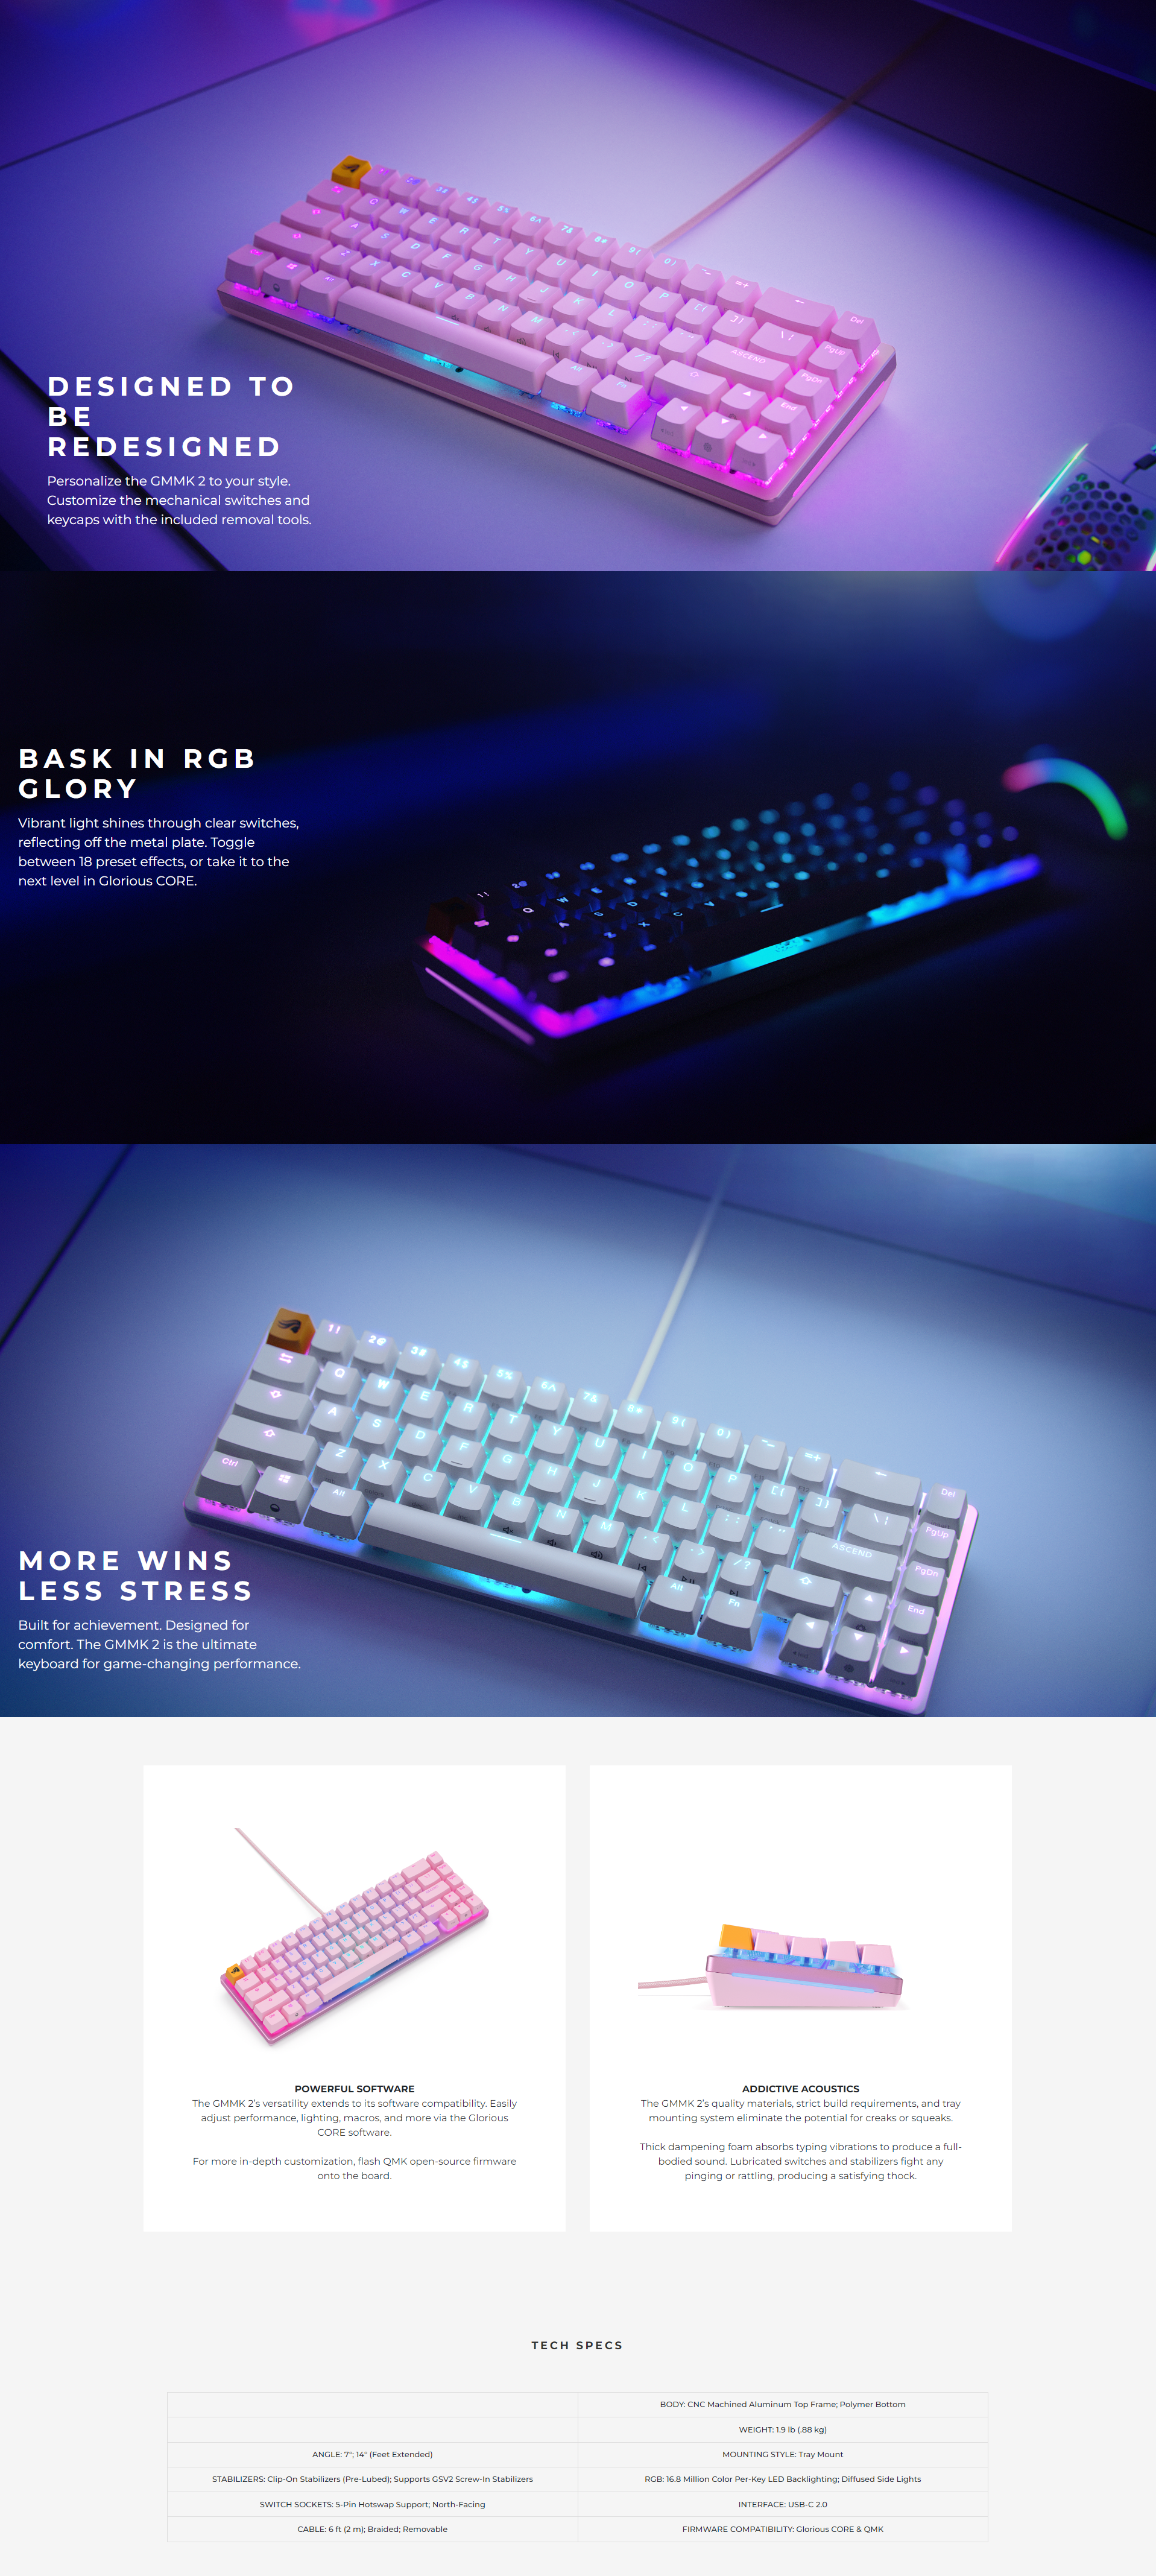 A large marketing image providing additional information about the product Glorious GMMK 2 Full Size Mechanical Keyboard - White Ice (Barebones) - Additional alt info not provided